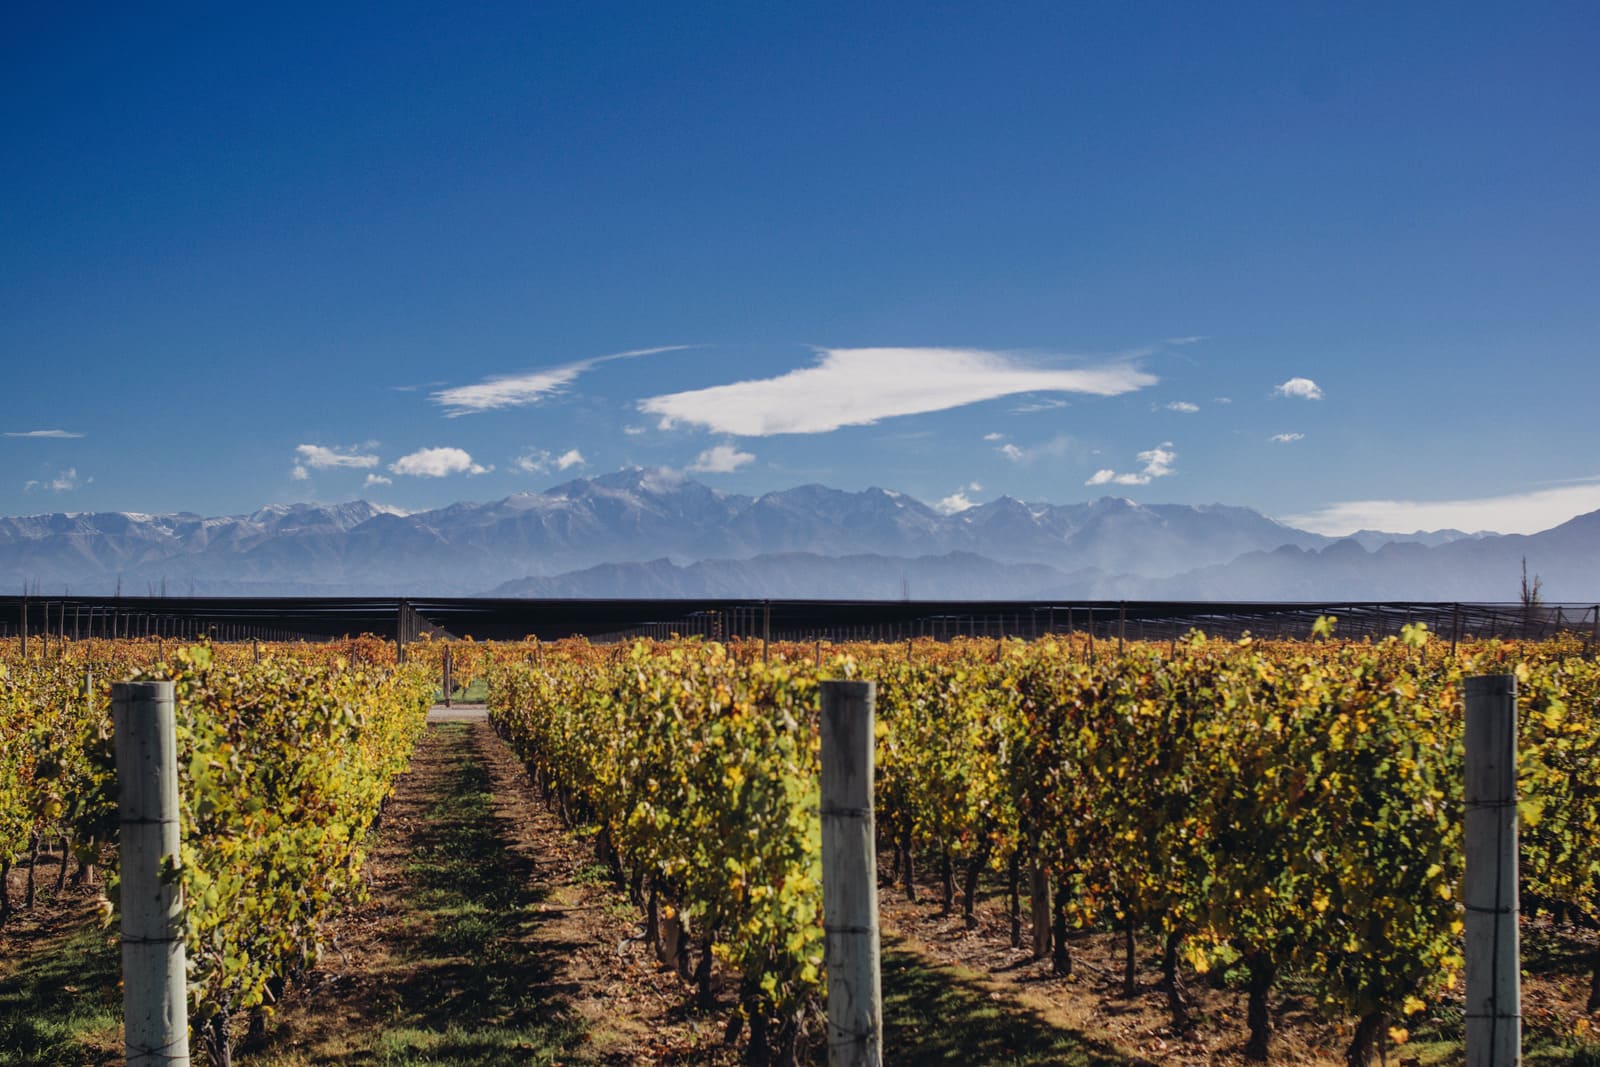 Mendoza Wine Route and inauguration of the first solar tourist train in Jujuy